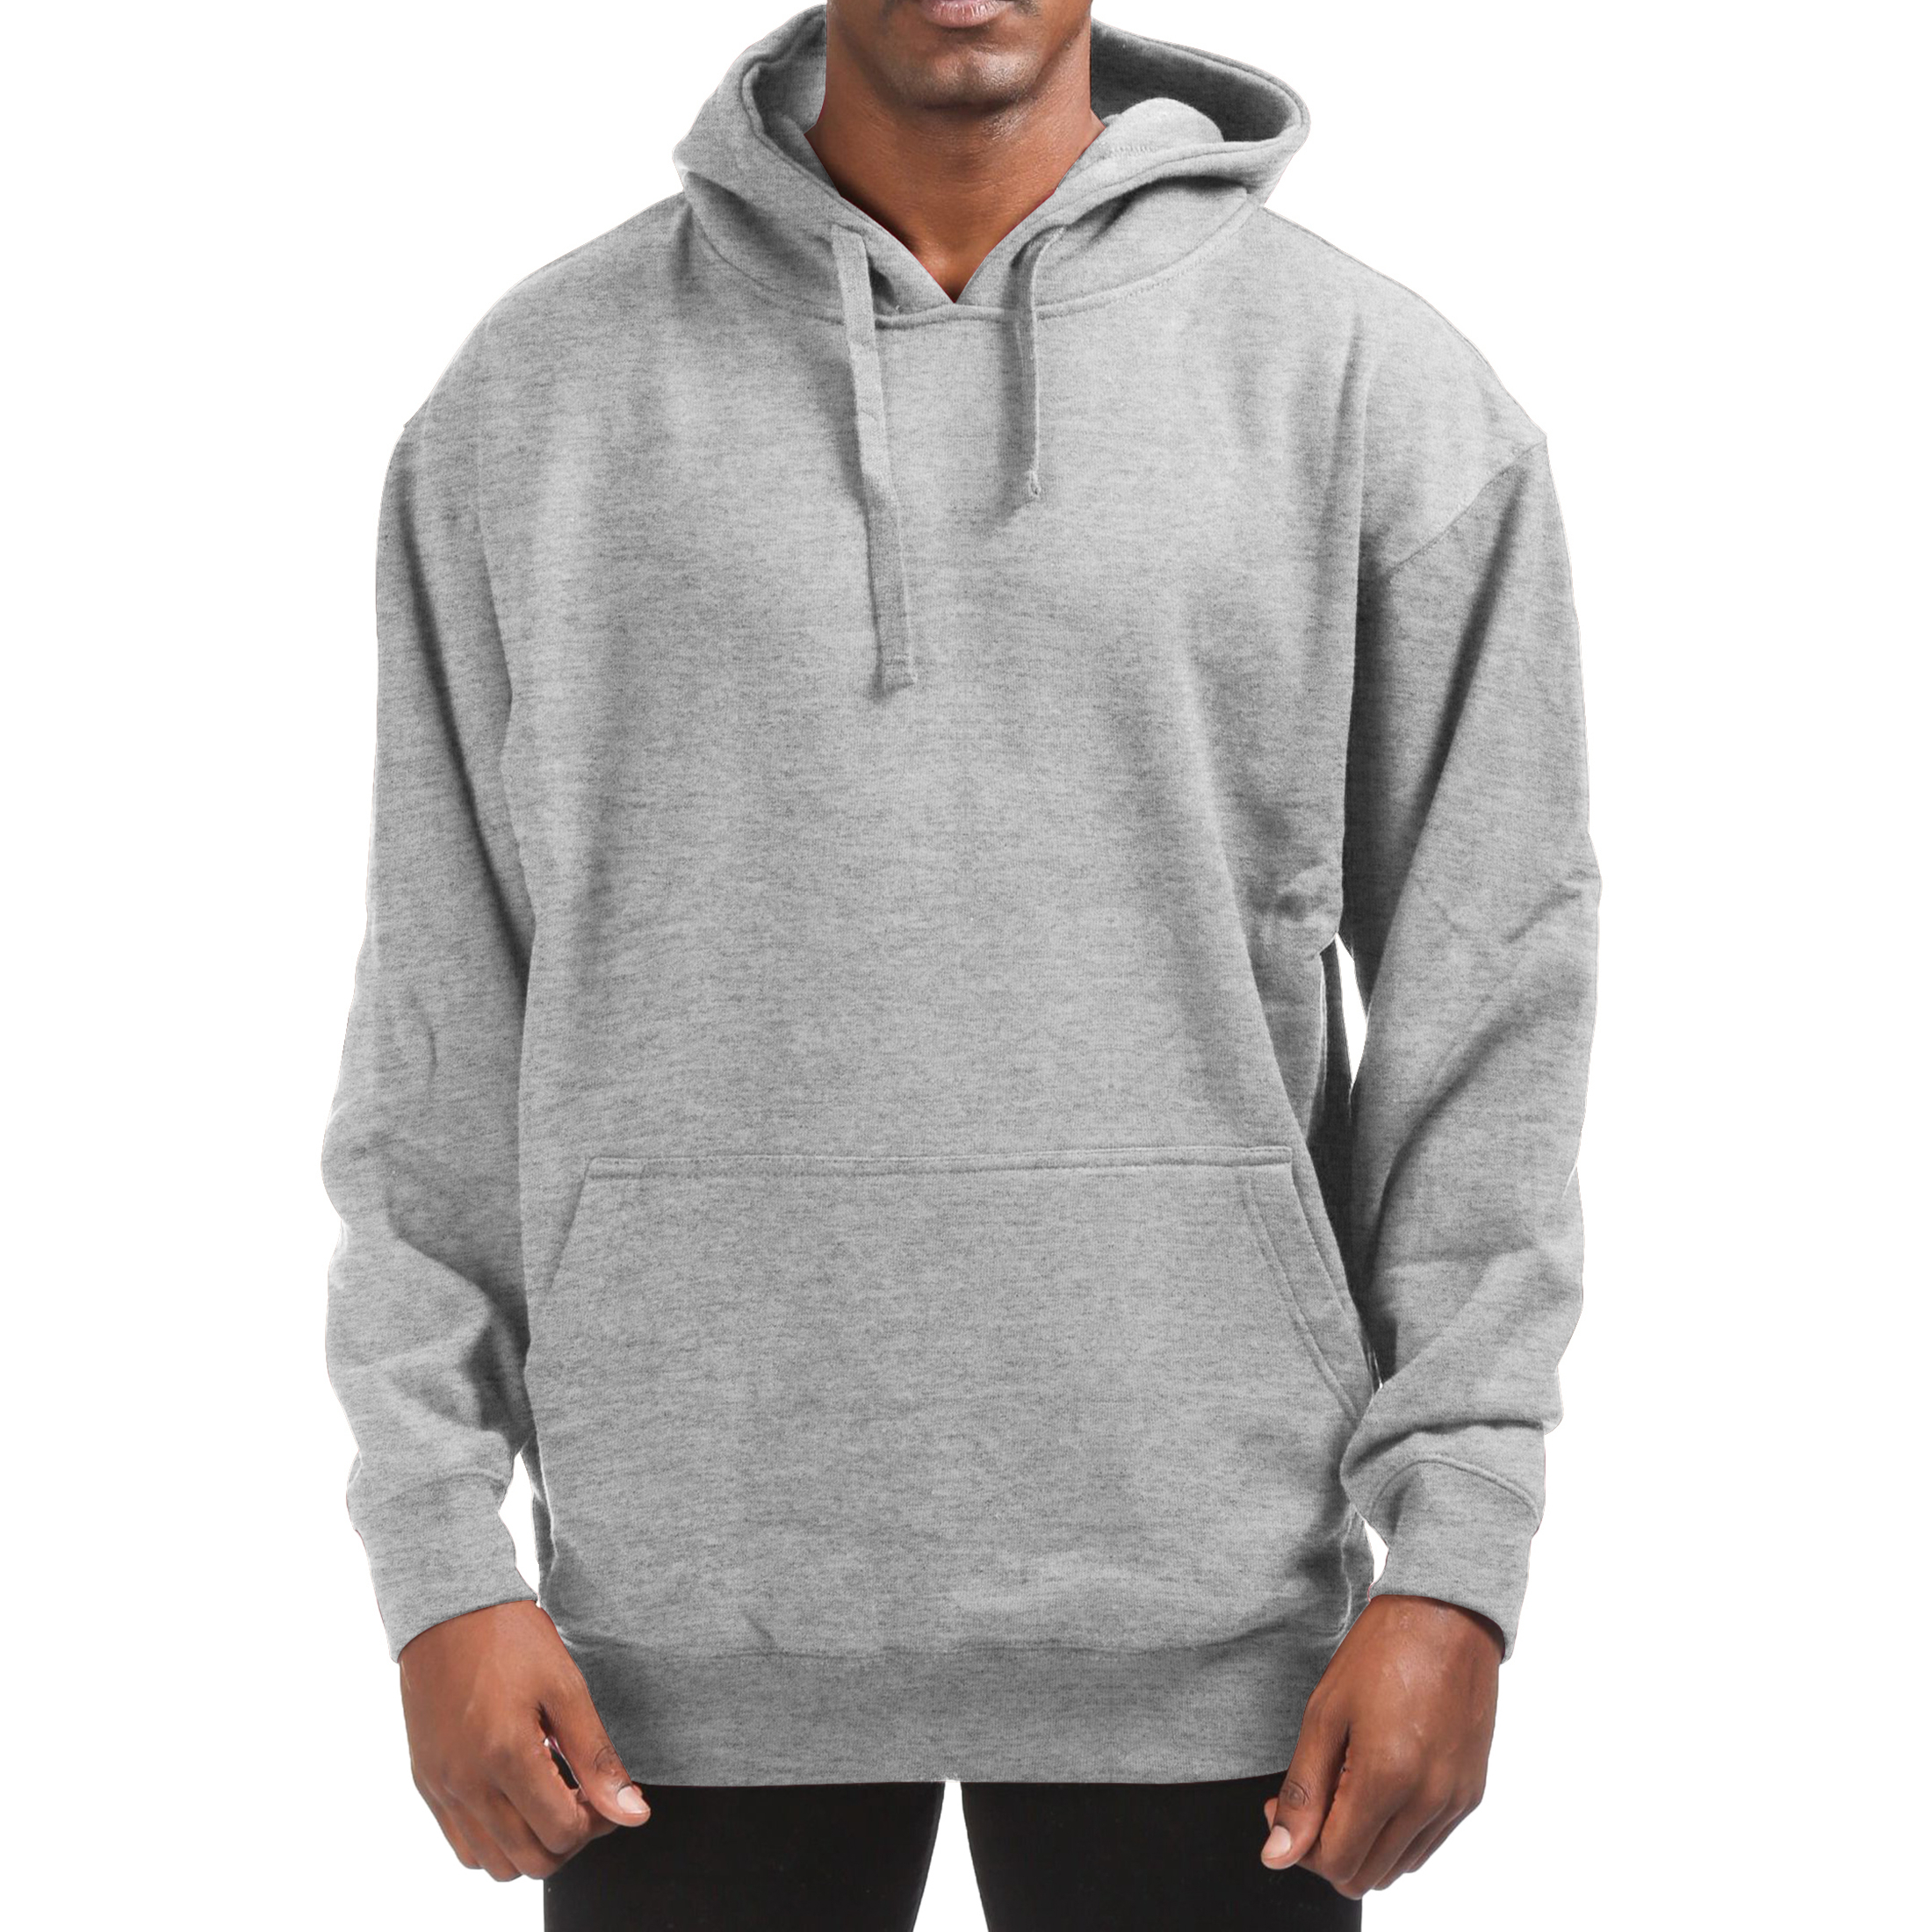 Men's Cotton-Blend Fleece Pullover Hoodie With Pocket (Big & Tall Sizes Available) - Gray, X-Large